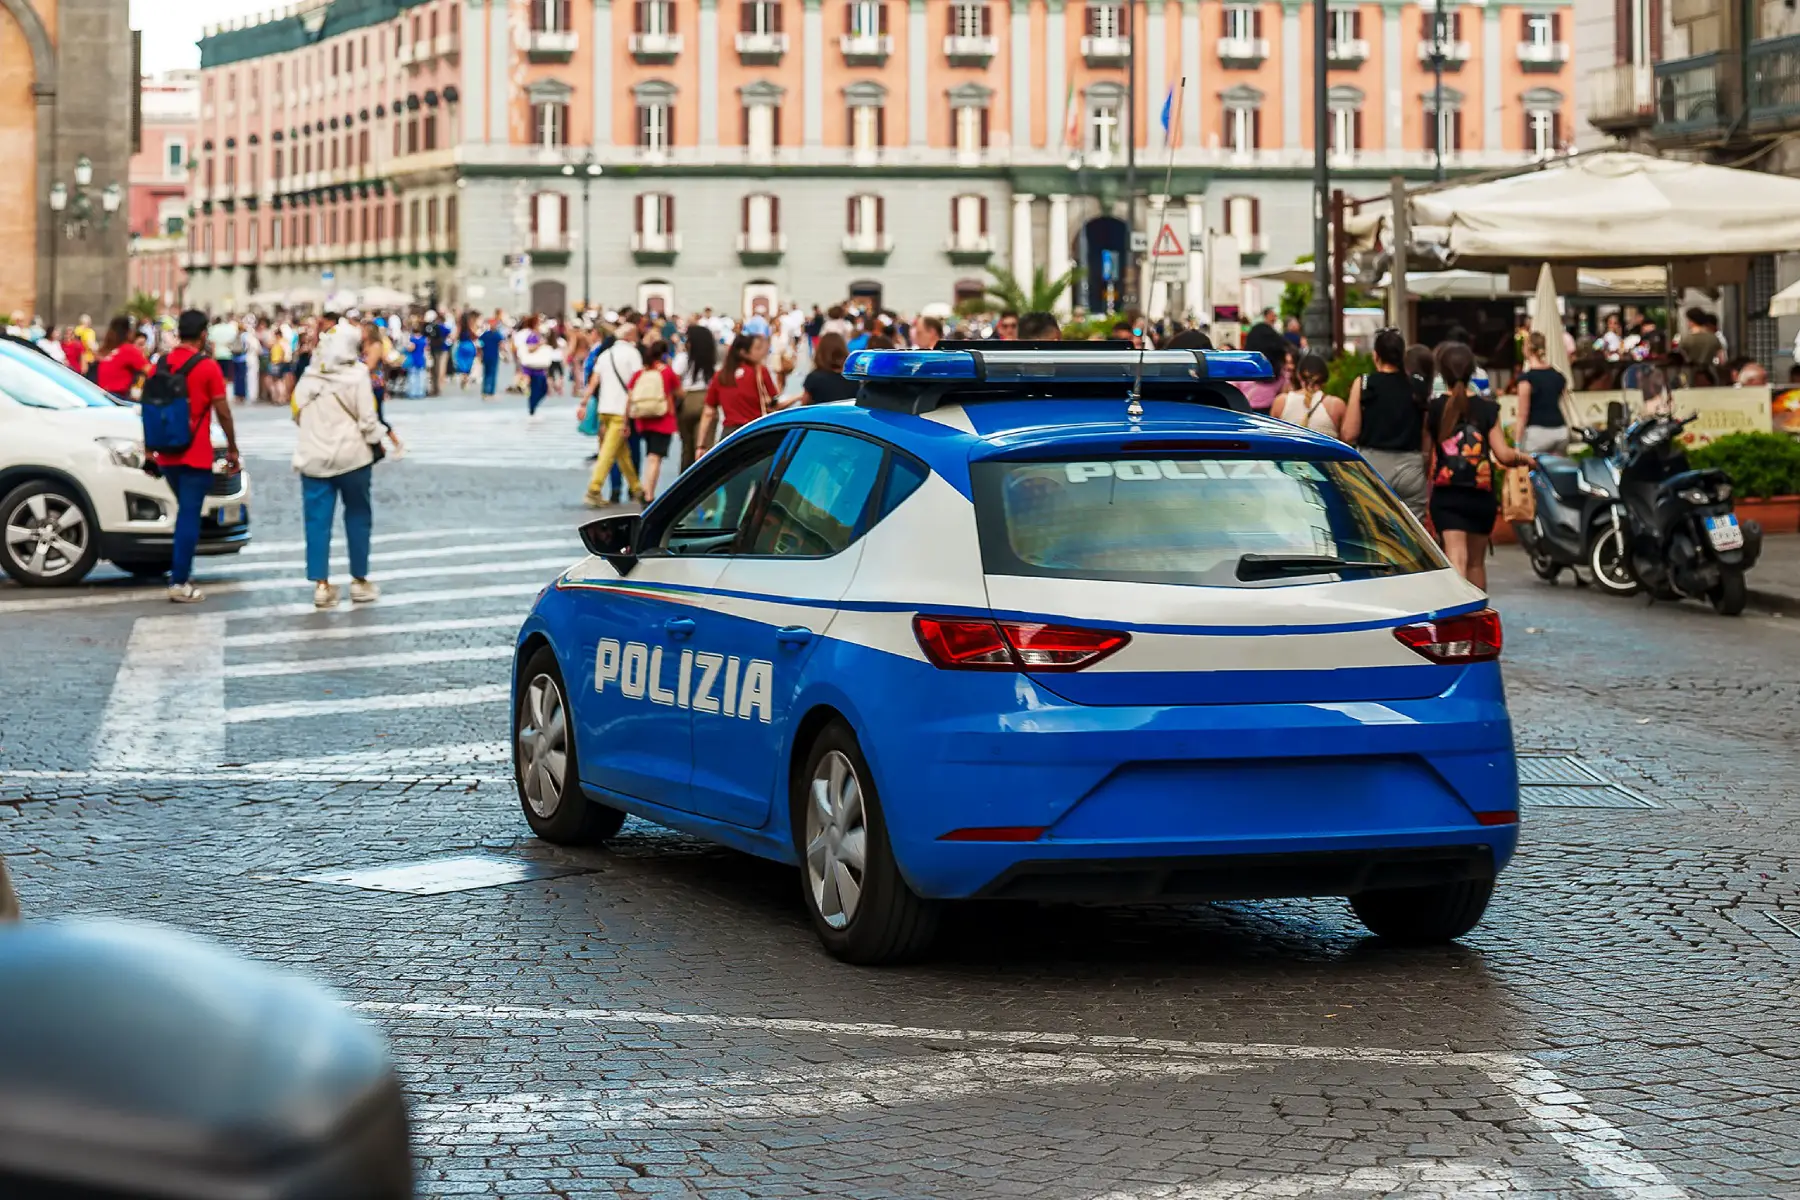 A blue and white police car patrolling the old city in Naples